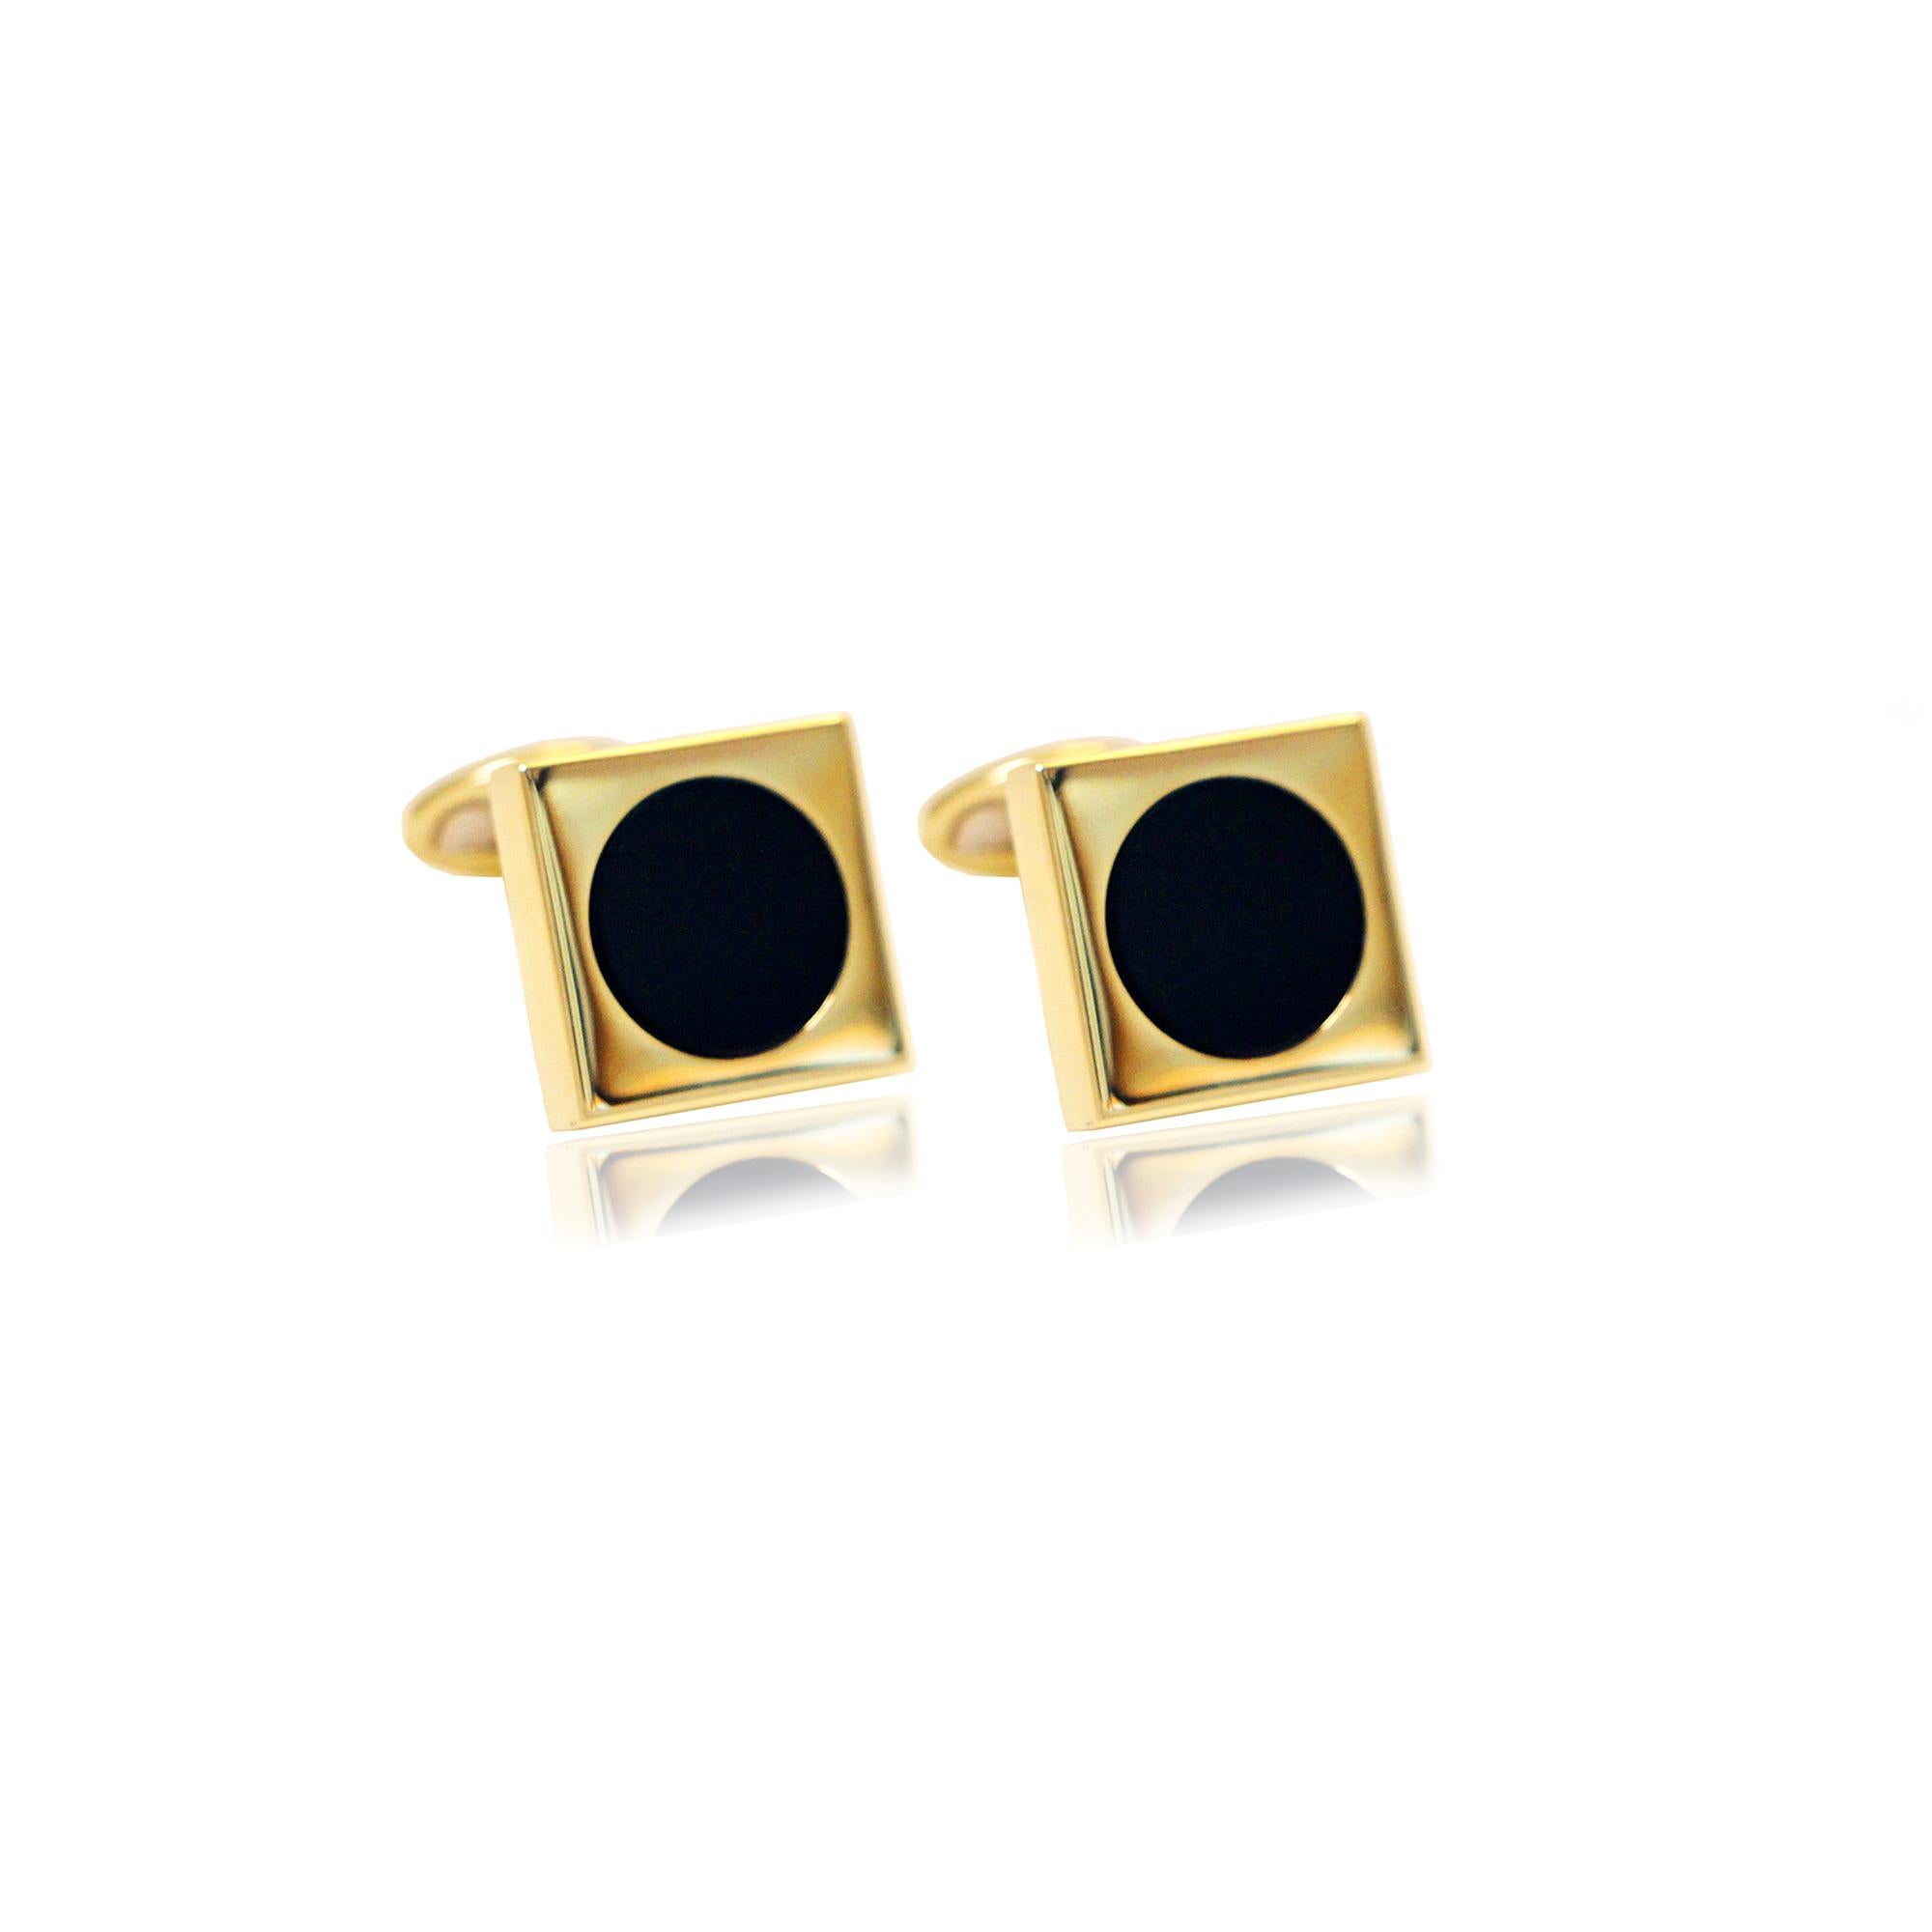 Square Circle Black Onyx Cufflinks Handcrafted in 14Kt Yellow Gold In New Condition For Sale In Athens, GR